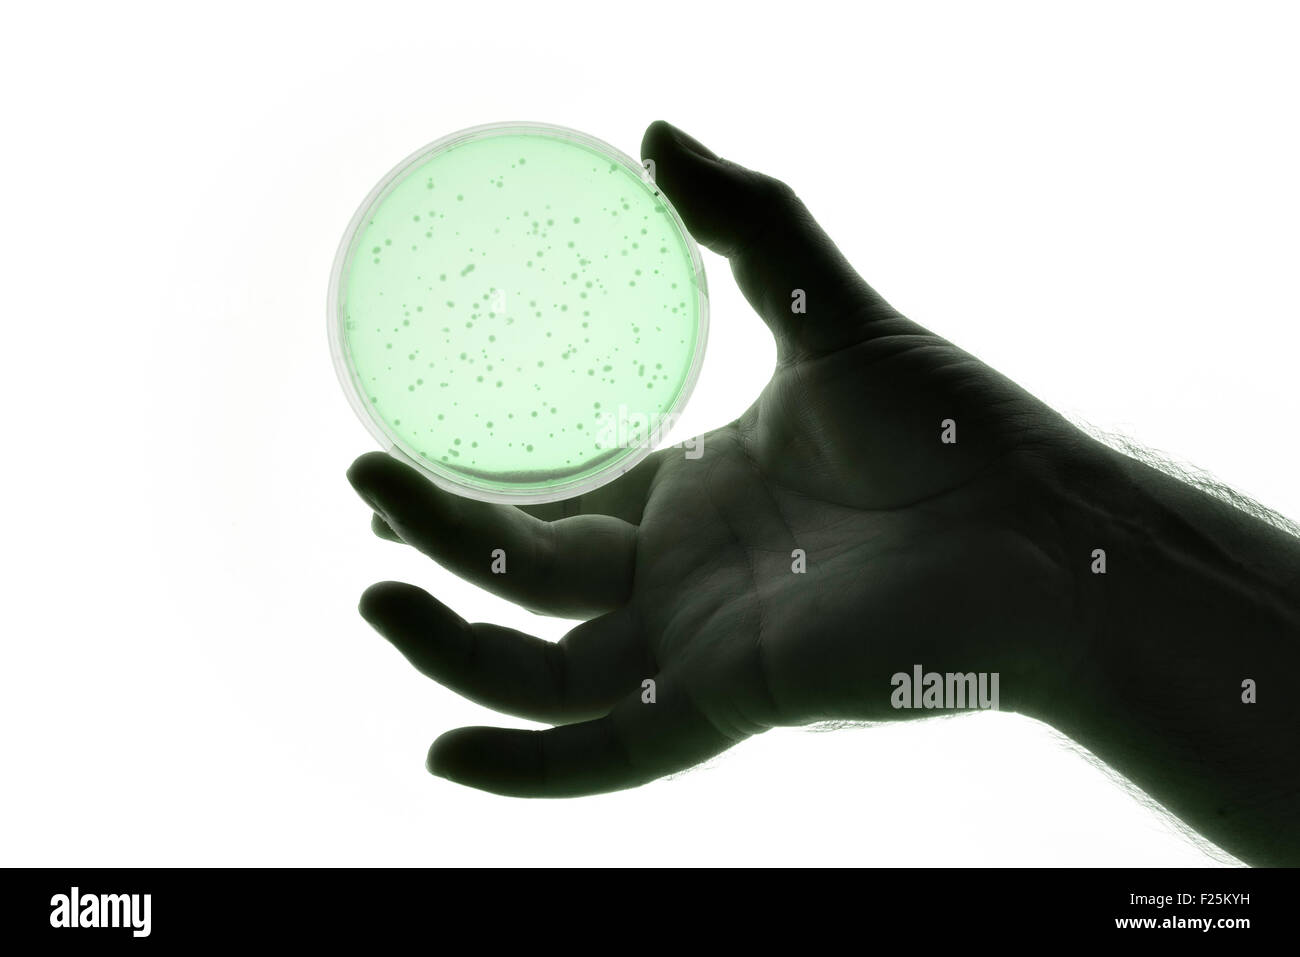 Image of a hand holding a Petri dish Stock Photo